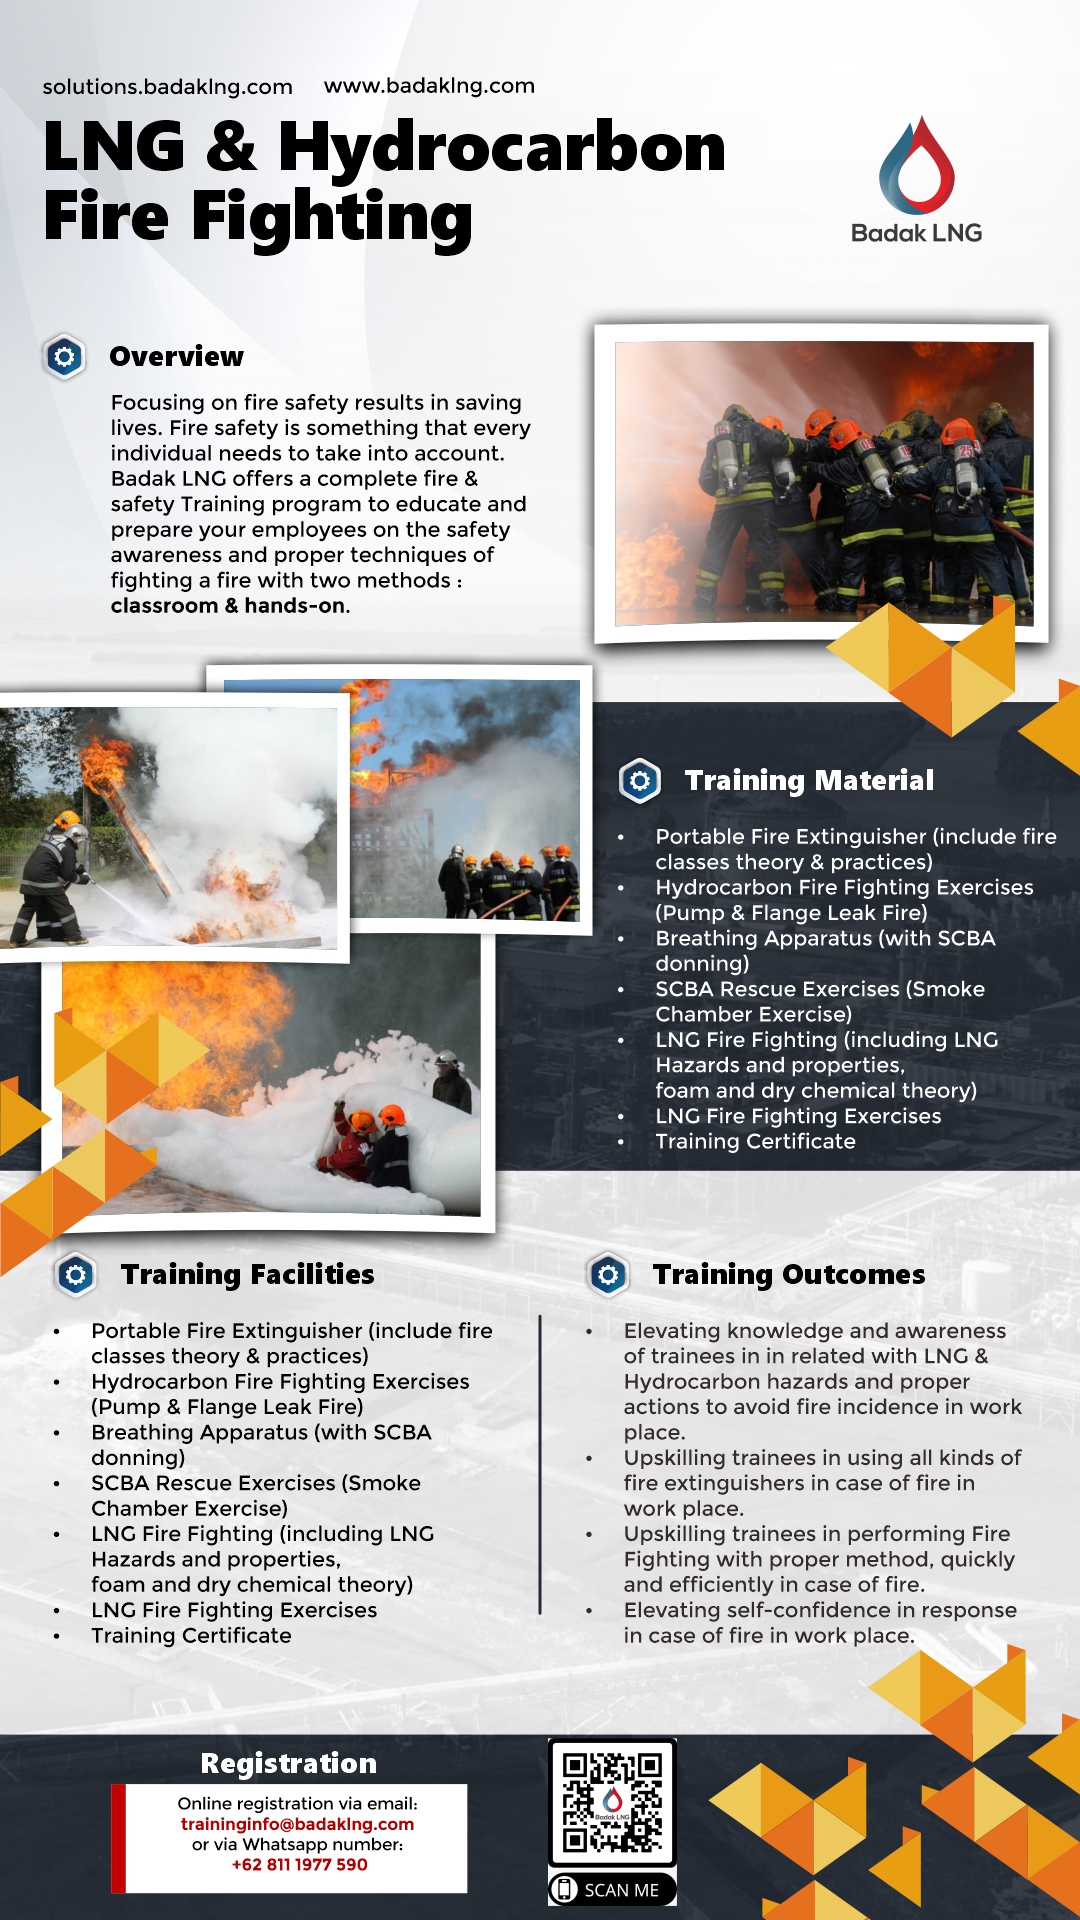 LNG & Hydrocarbon Fire Fighting